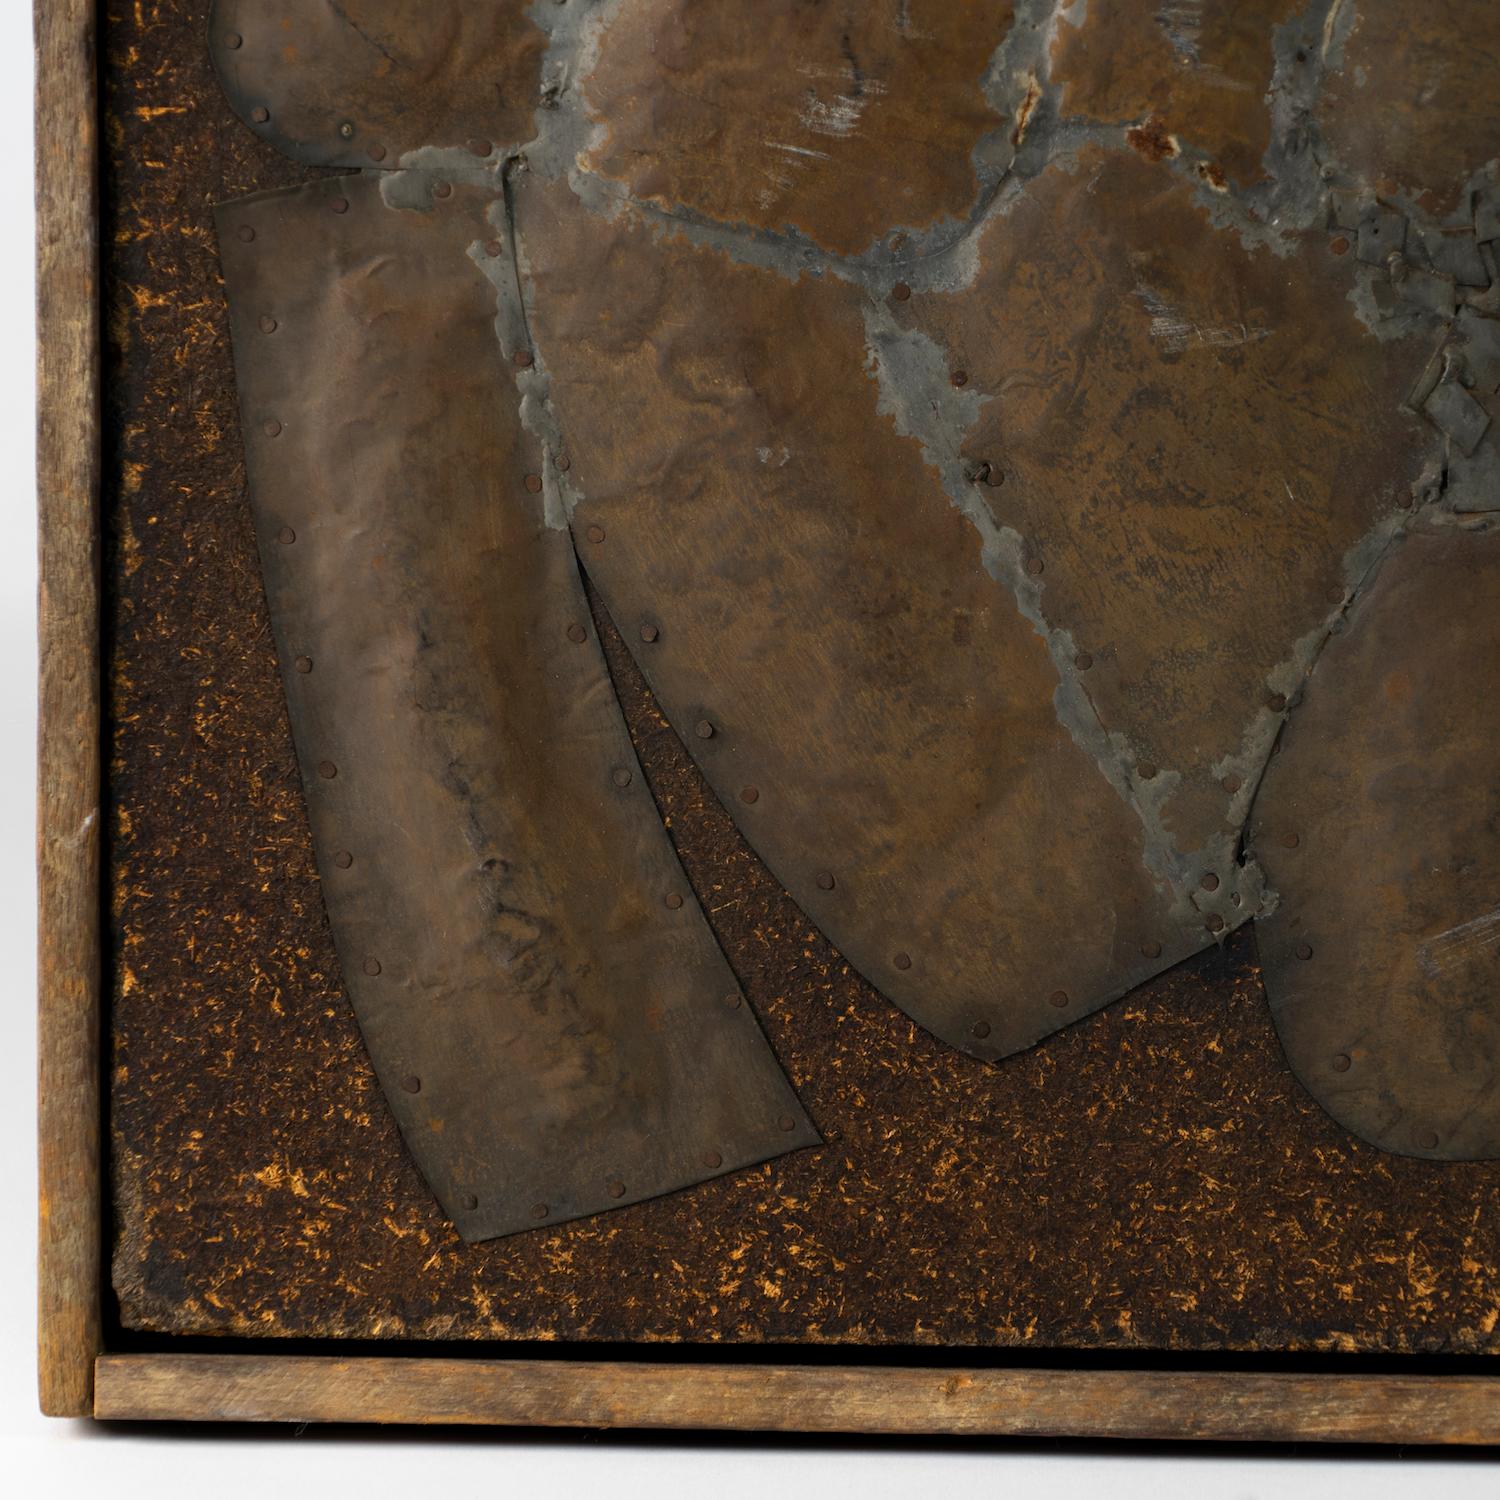 Mixed-Media Brutalist abstract construction, signed Nelson, dated 1962 on Verso. Copper in painted wood board. Hammered, nailed and textured to create a striking repoussé effect. Would be a sophisticated addition to either a modern, eclectic or